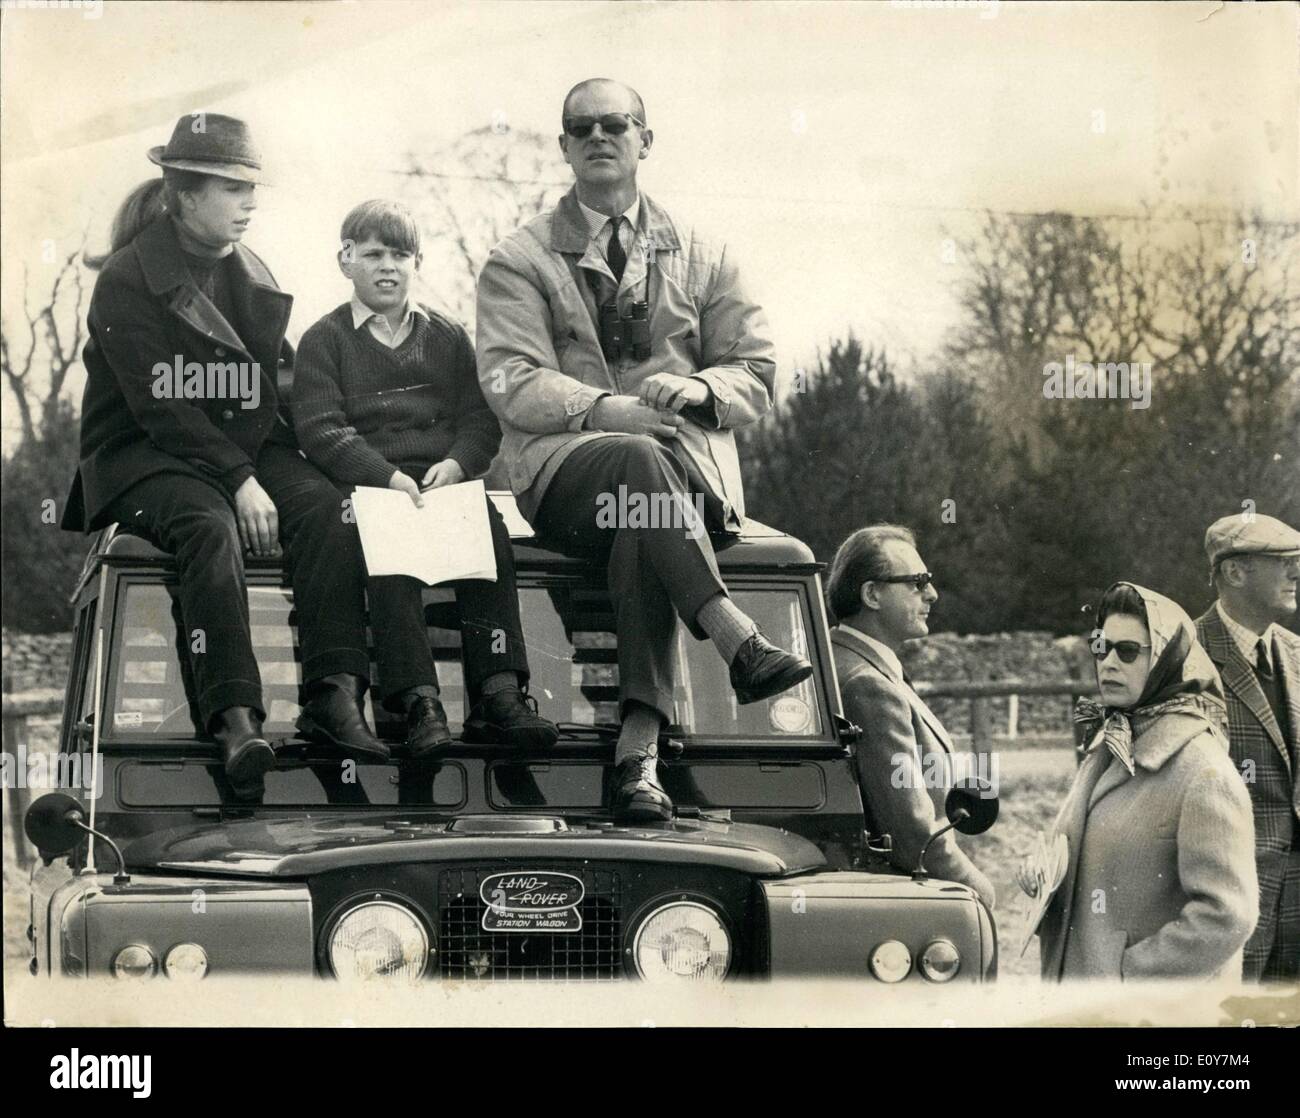 Apr. 04, 1969 - Royal Spectators at the Badminton Horse Trails on the Duke of Beaufort's Estate: The Queen with Prince Philip and other members of the Royal Family today attend the Badminton Horse Trials, held at Badminton, Gloucestershire, the home of the Duke of Beaufort. Photo shows the Queen wearing a headscarf stands beside a Landrover while Princes Anne, Prince Andrew and Prince Philip sit on the roof of the vehicle watching today's events. Stock Photo